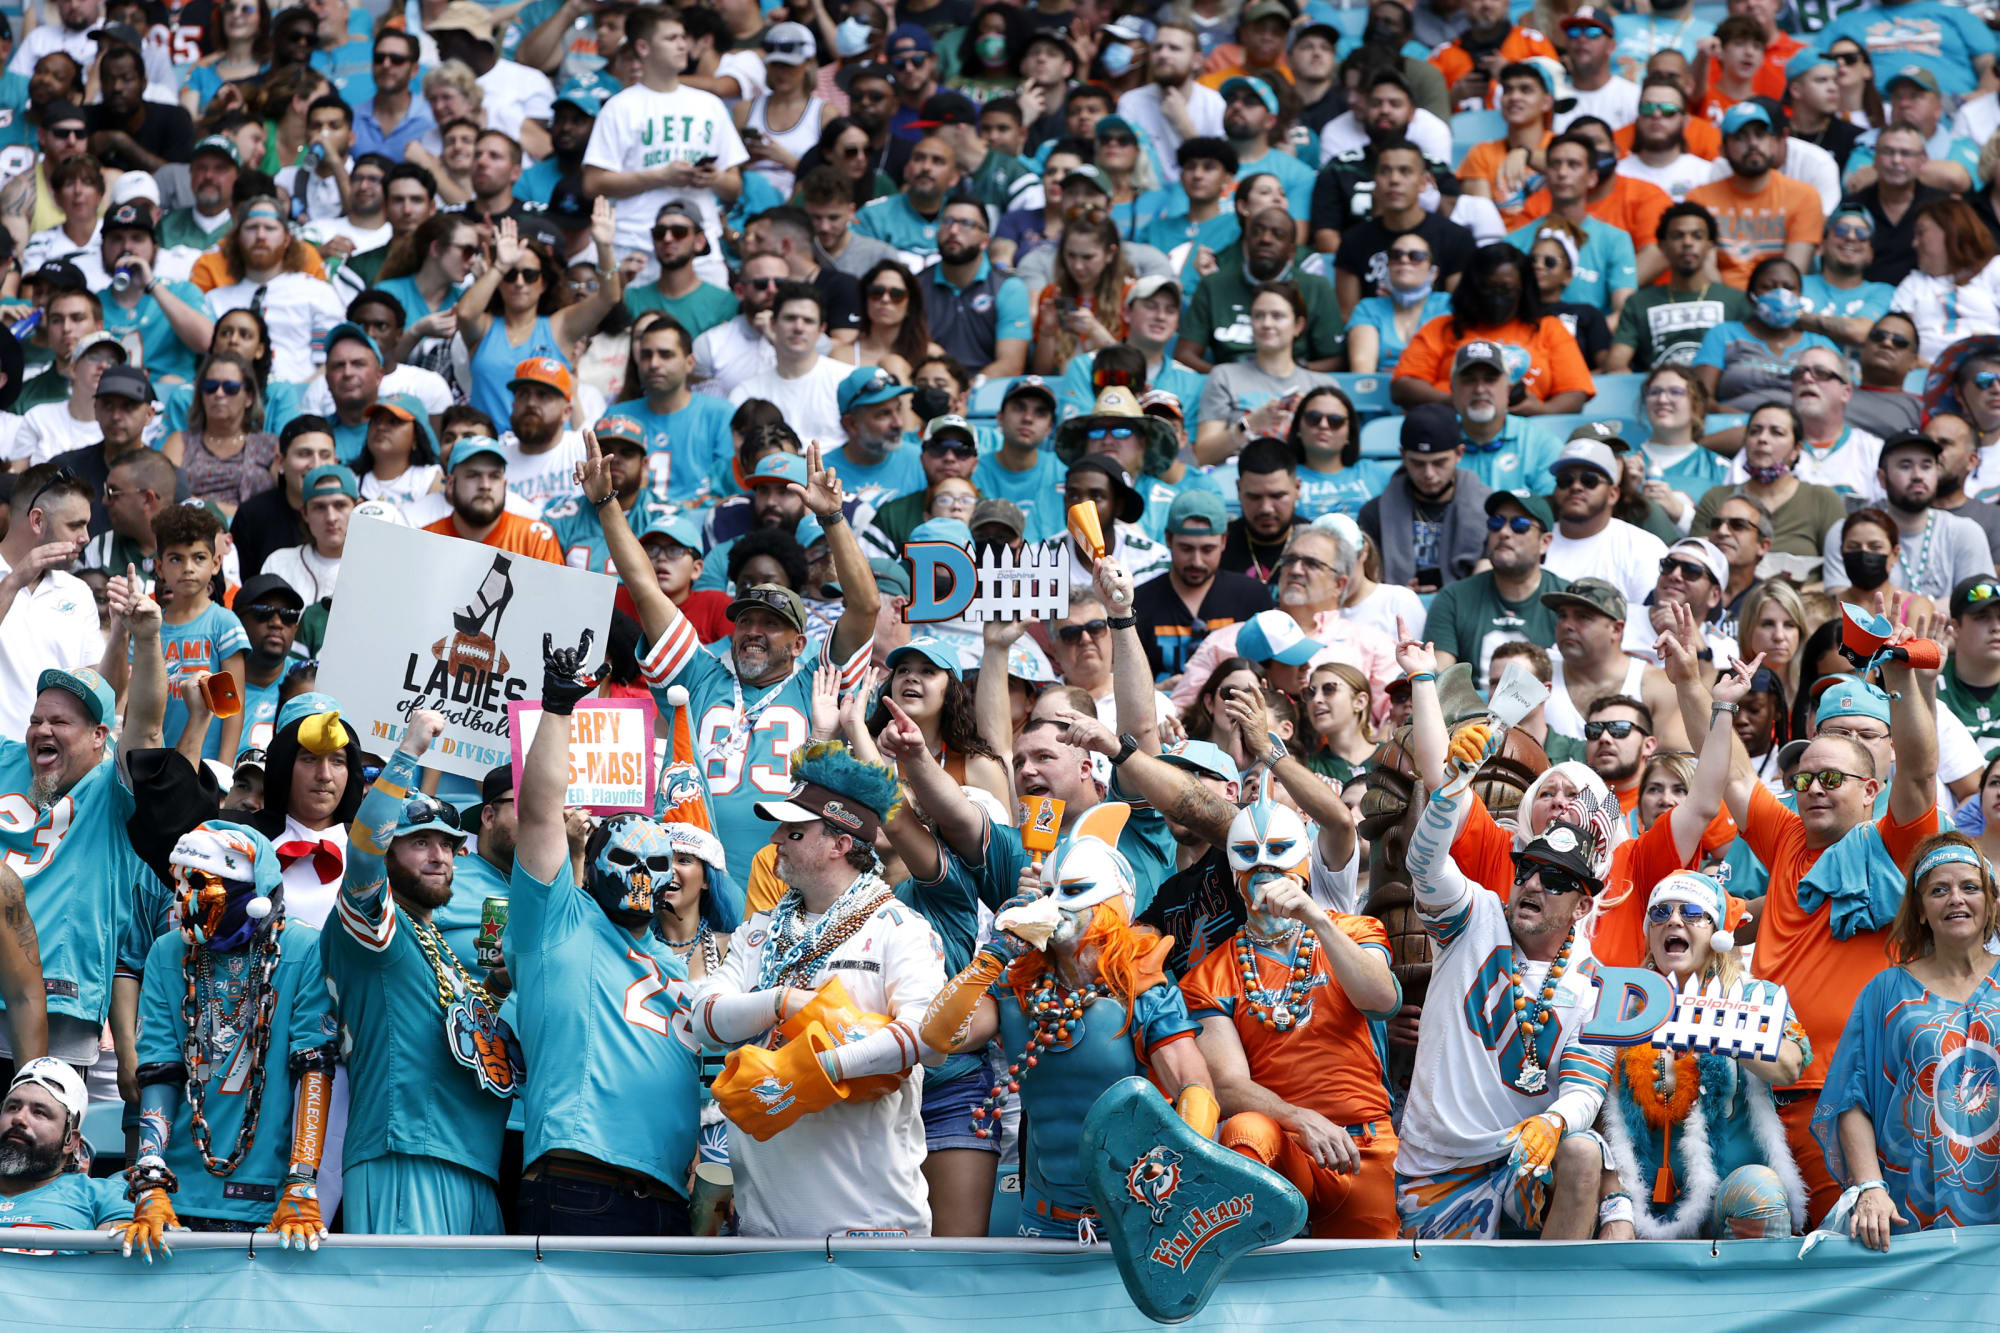 Broken record: Miami Dolphins fans ready to invade MetLife on Sunday